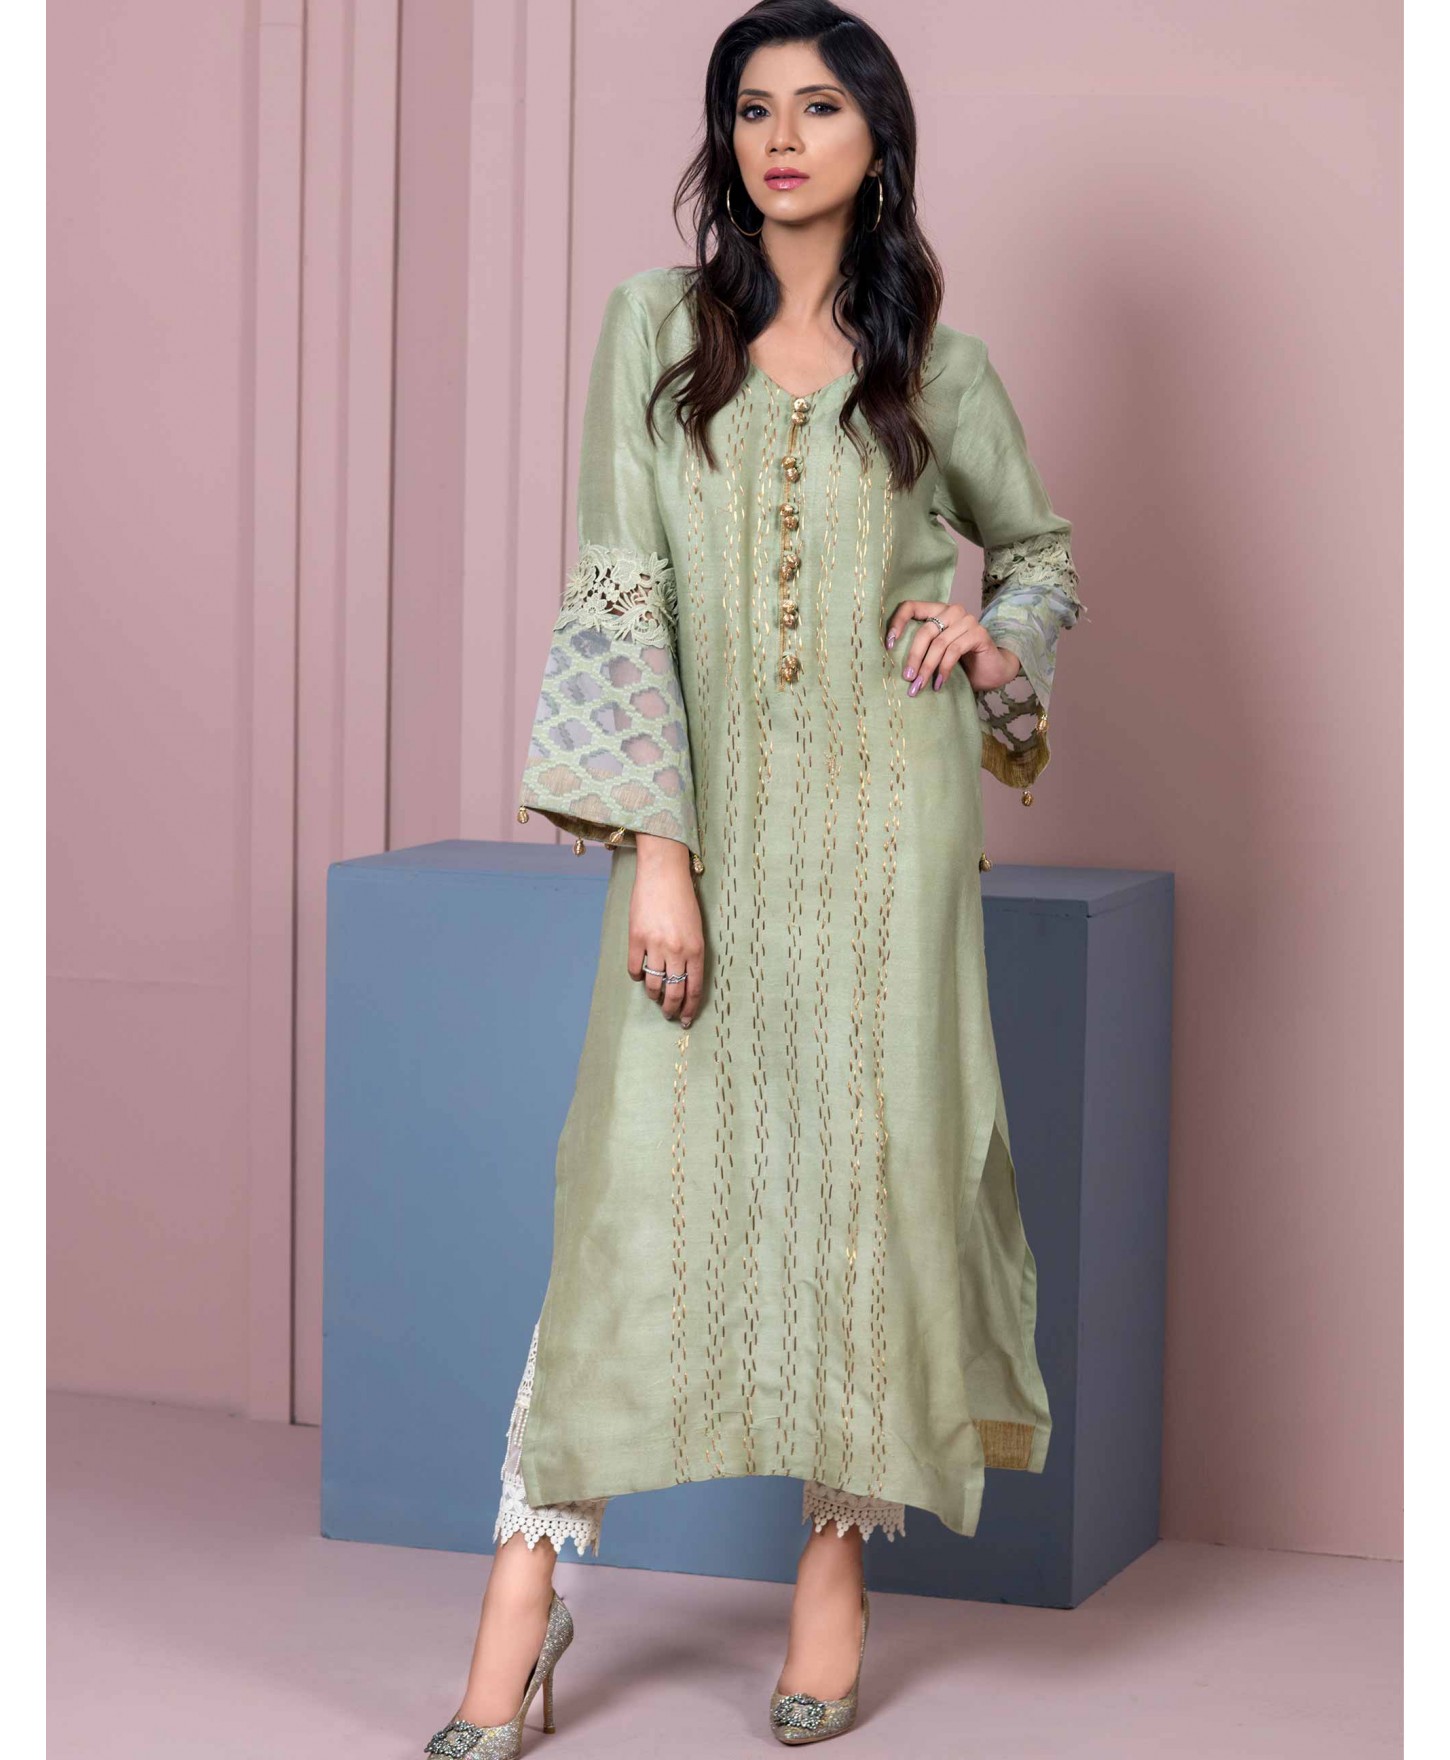 Buy this elegant and stylish Pakistani net suit by Crates by Pasho available online for sale